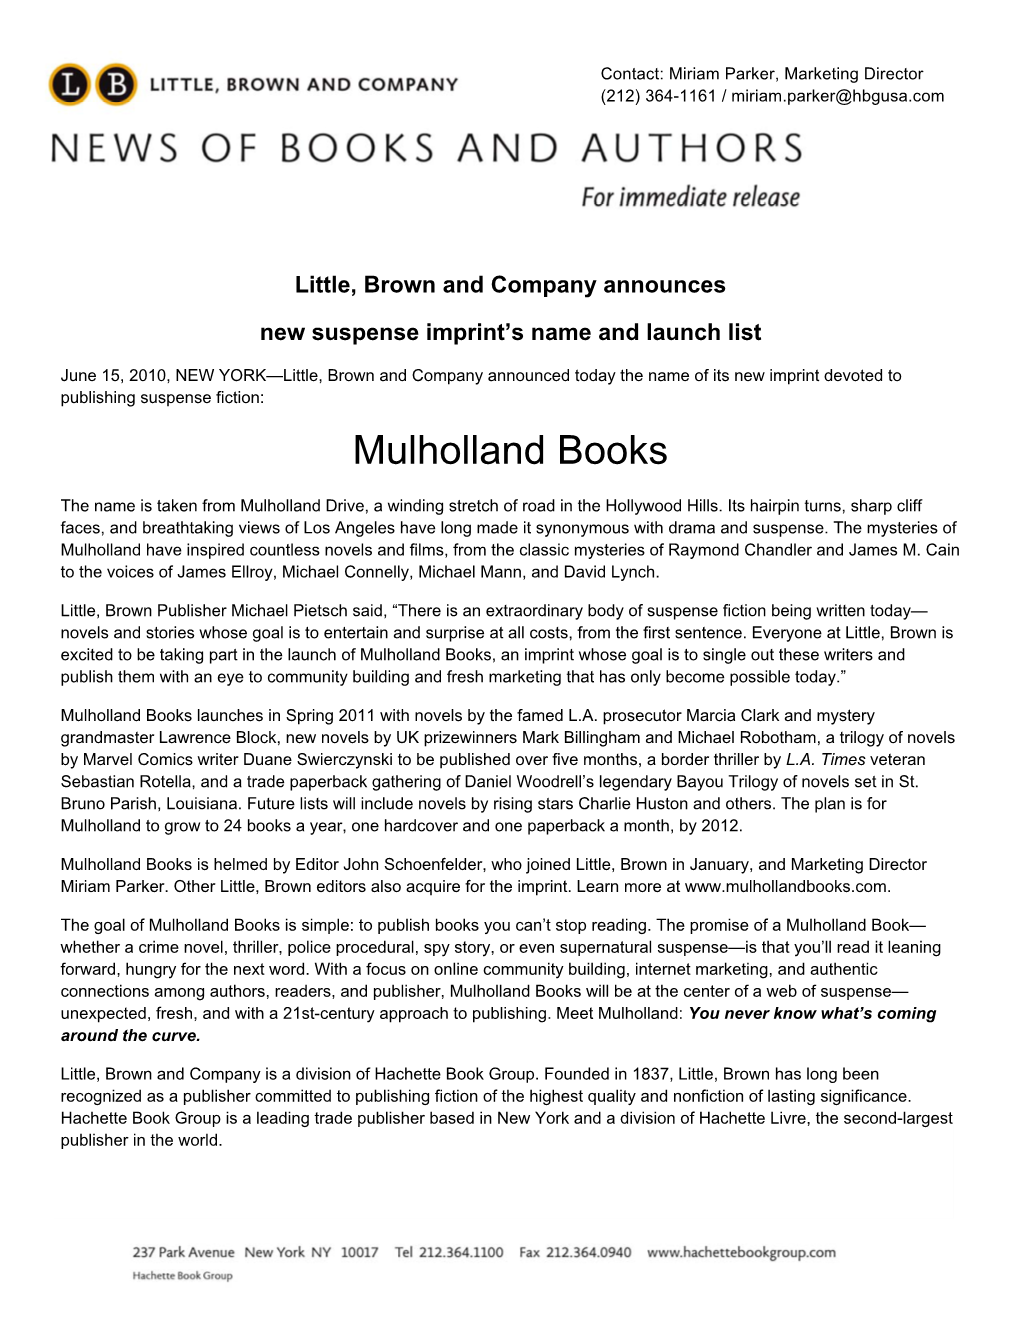 Mulholland Books Launch Press Release